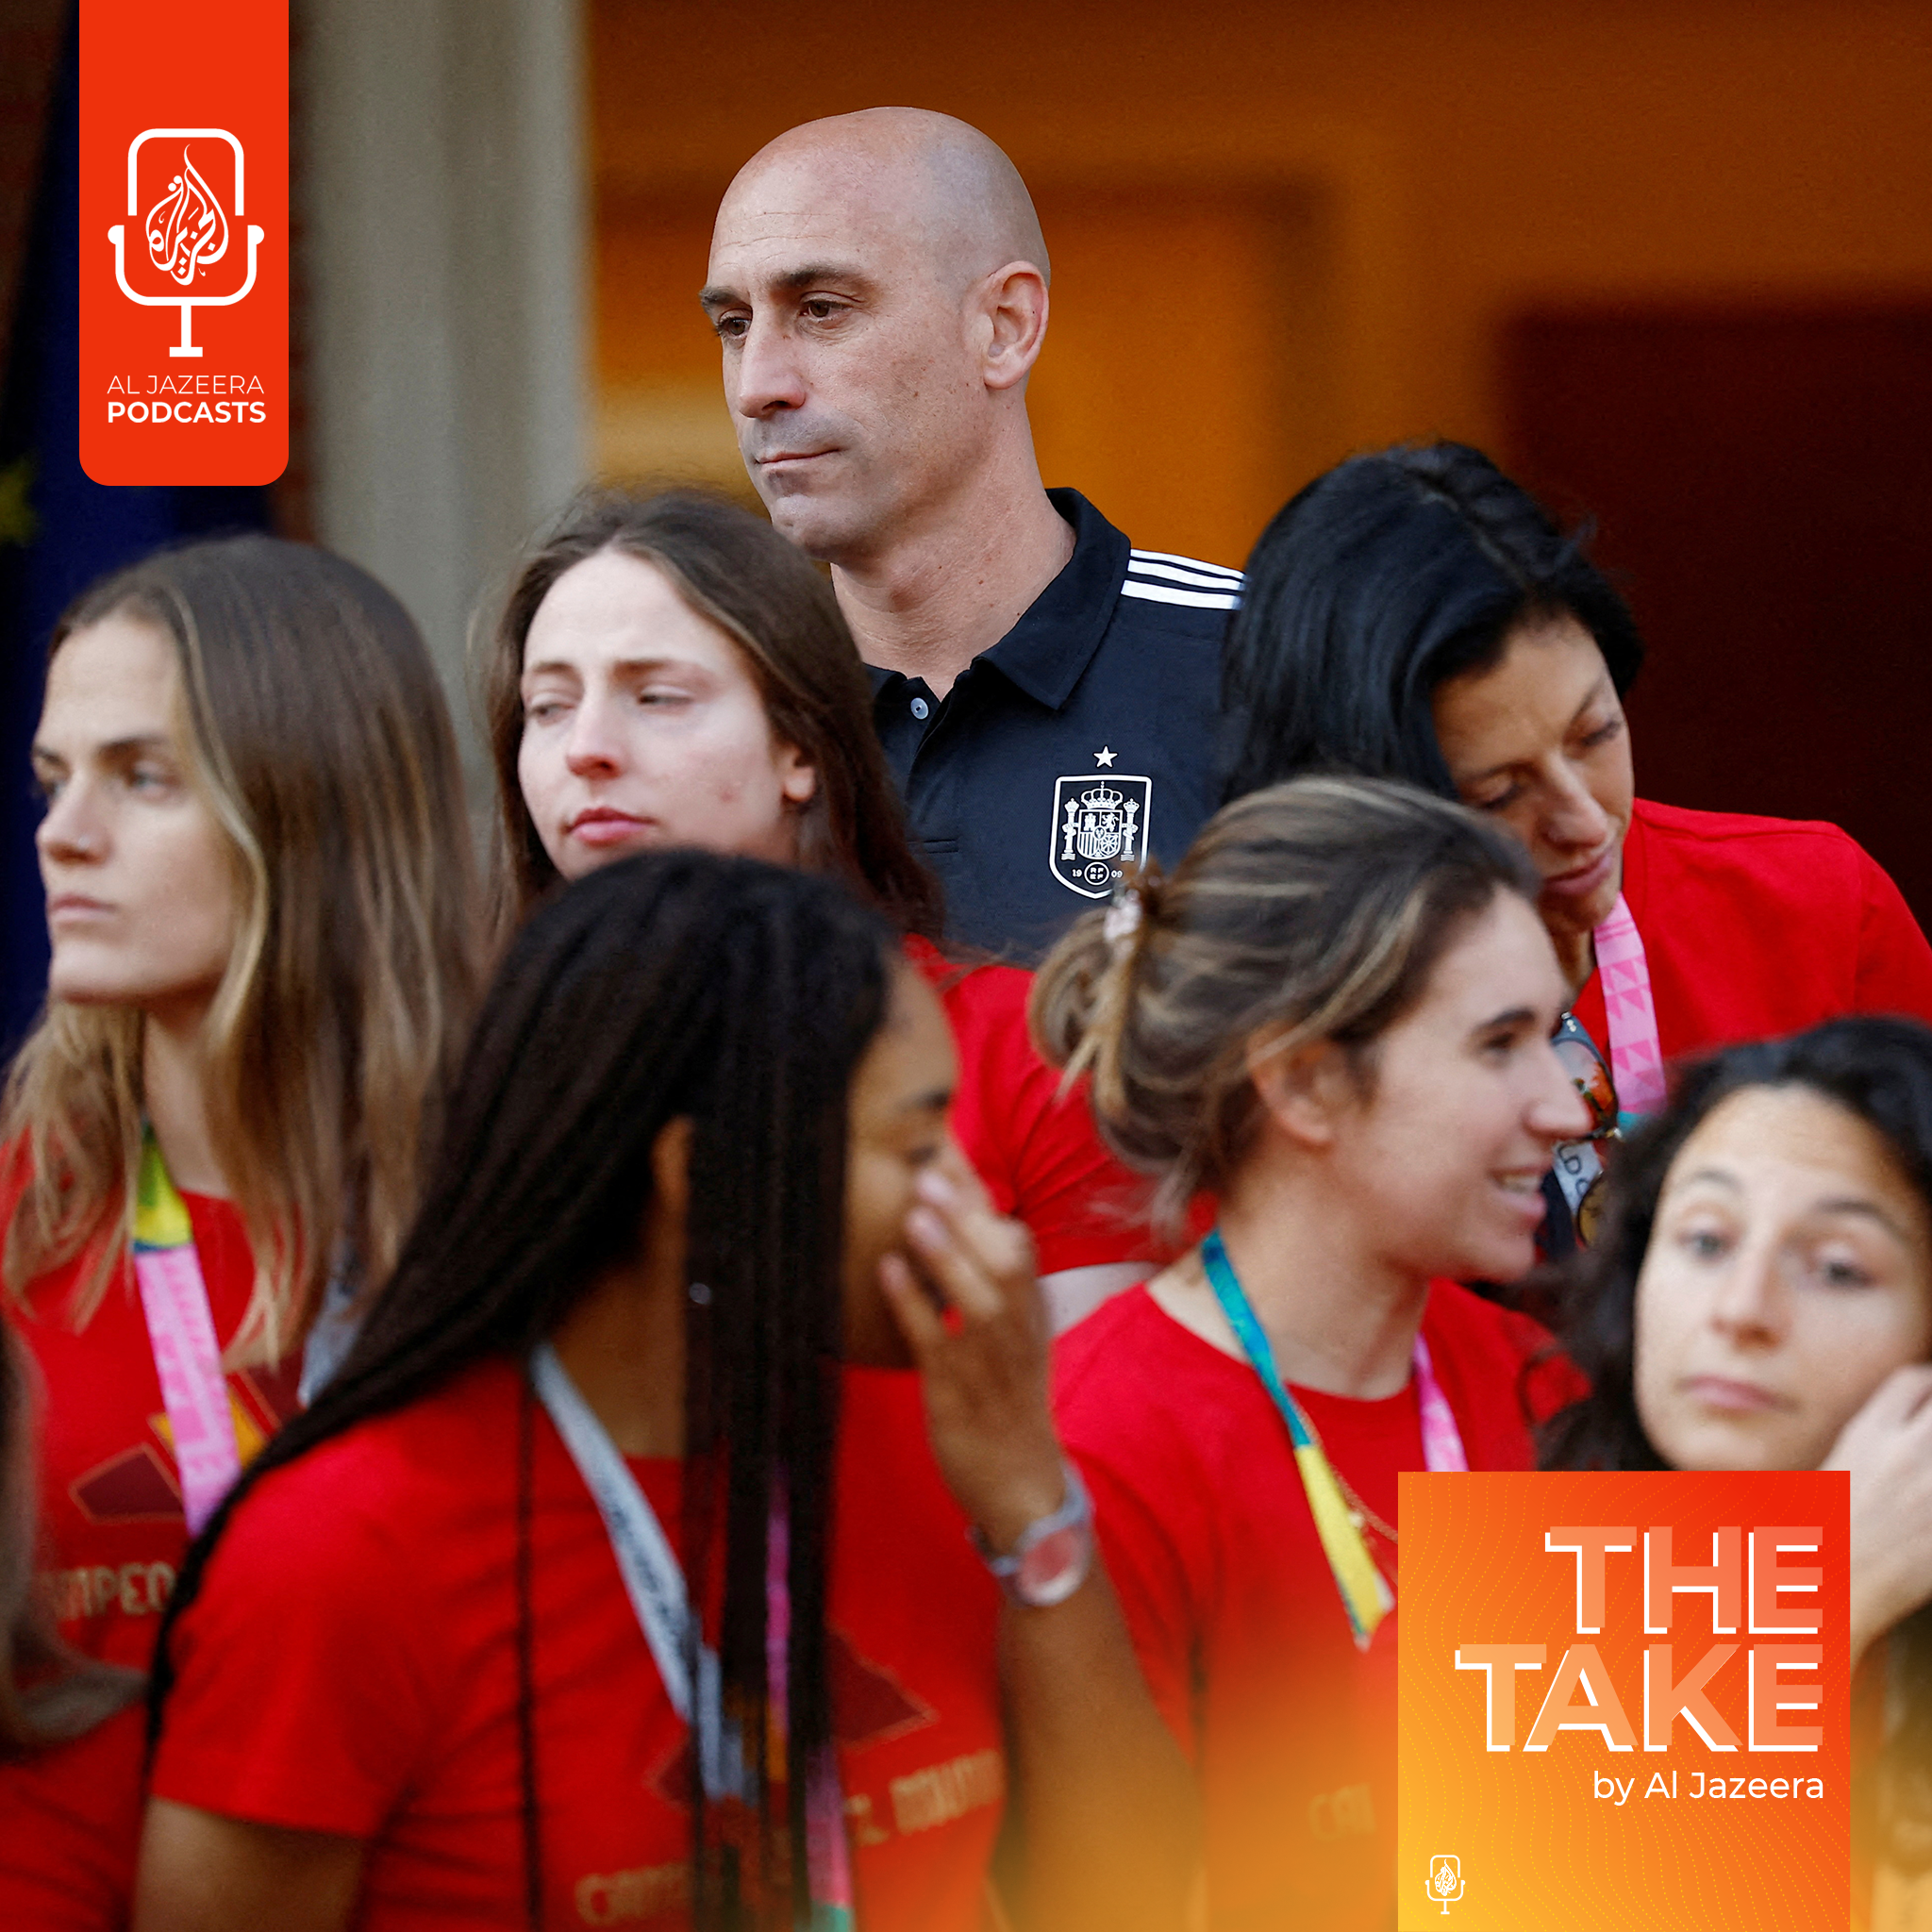 Luis Rubiales resignation: What next for women’s football in Spain?